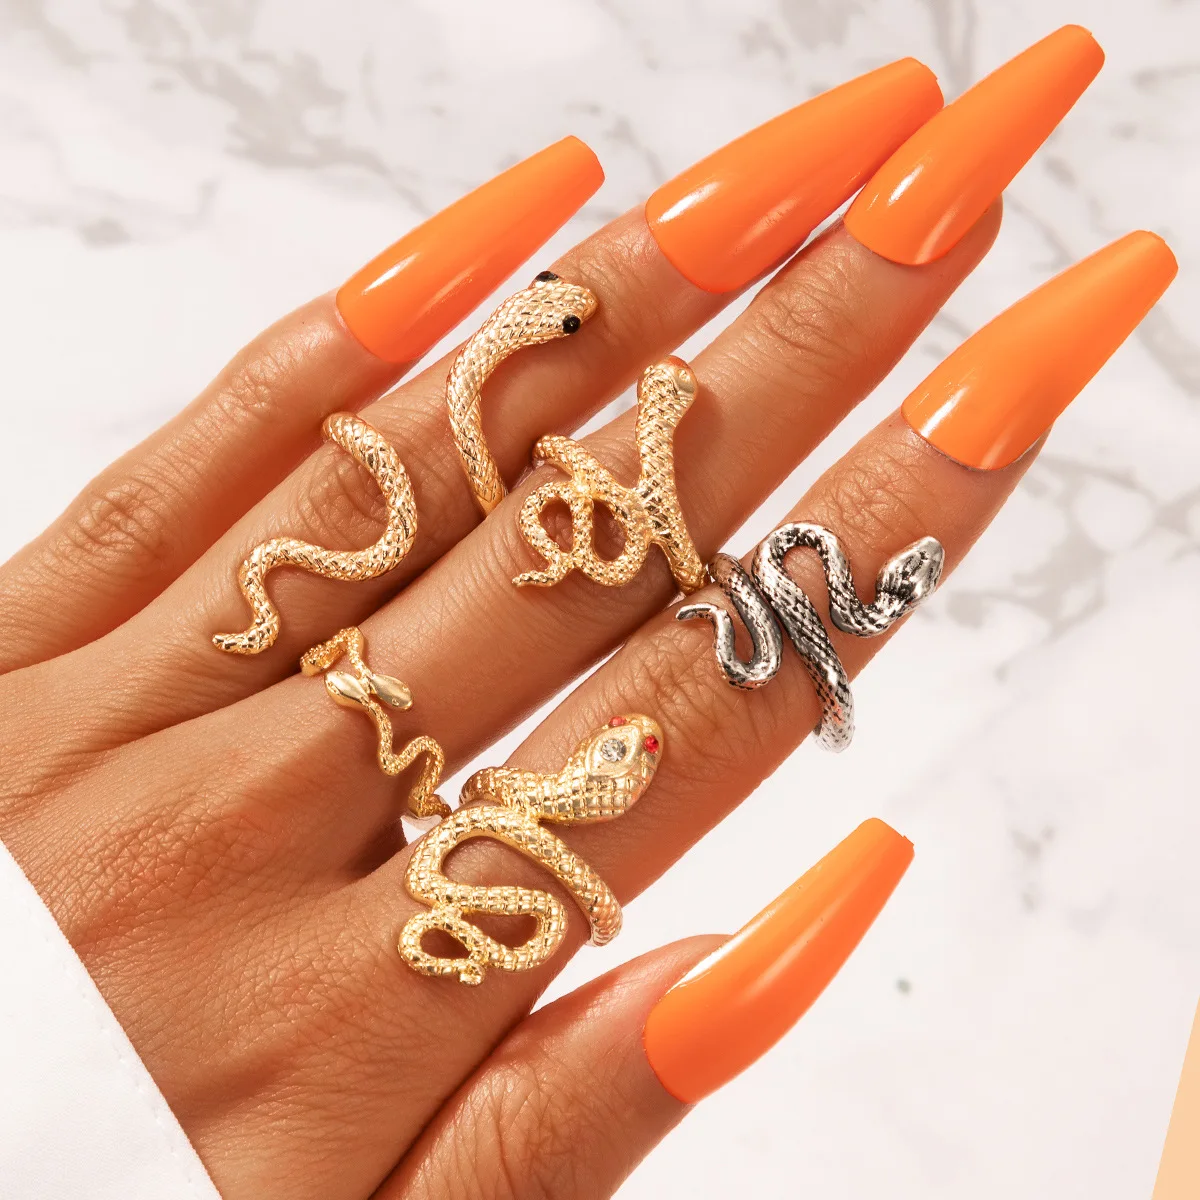 

5Pcs Animal Snake Rings Set for Women Exaggerated Long Snake Cobra Serpent Dragon Open Ring Men Teen Gothic Jewelry Adjustable